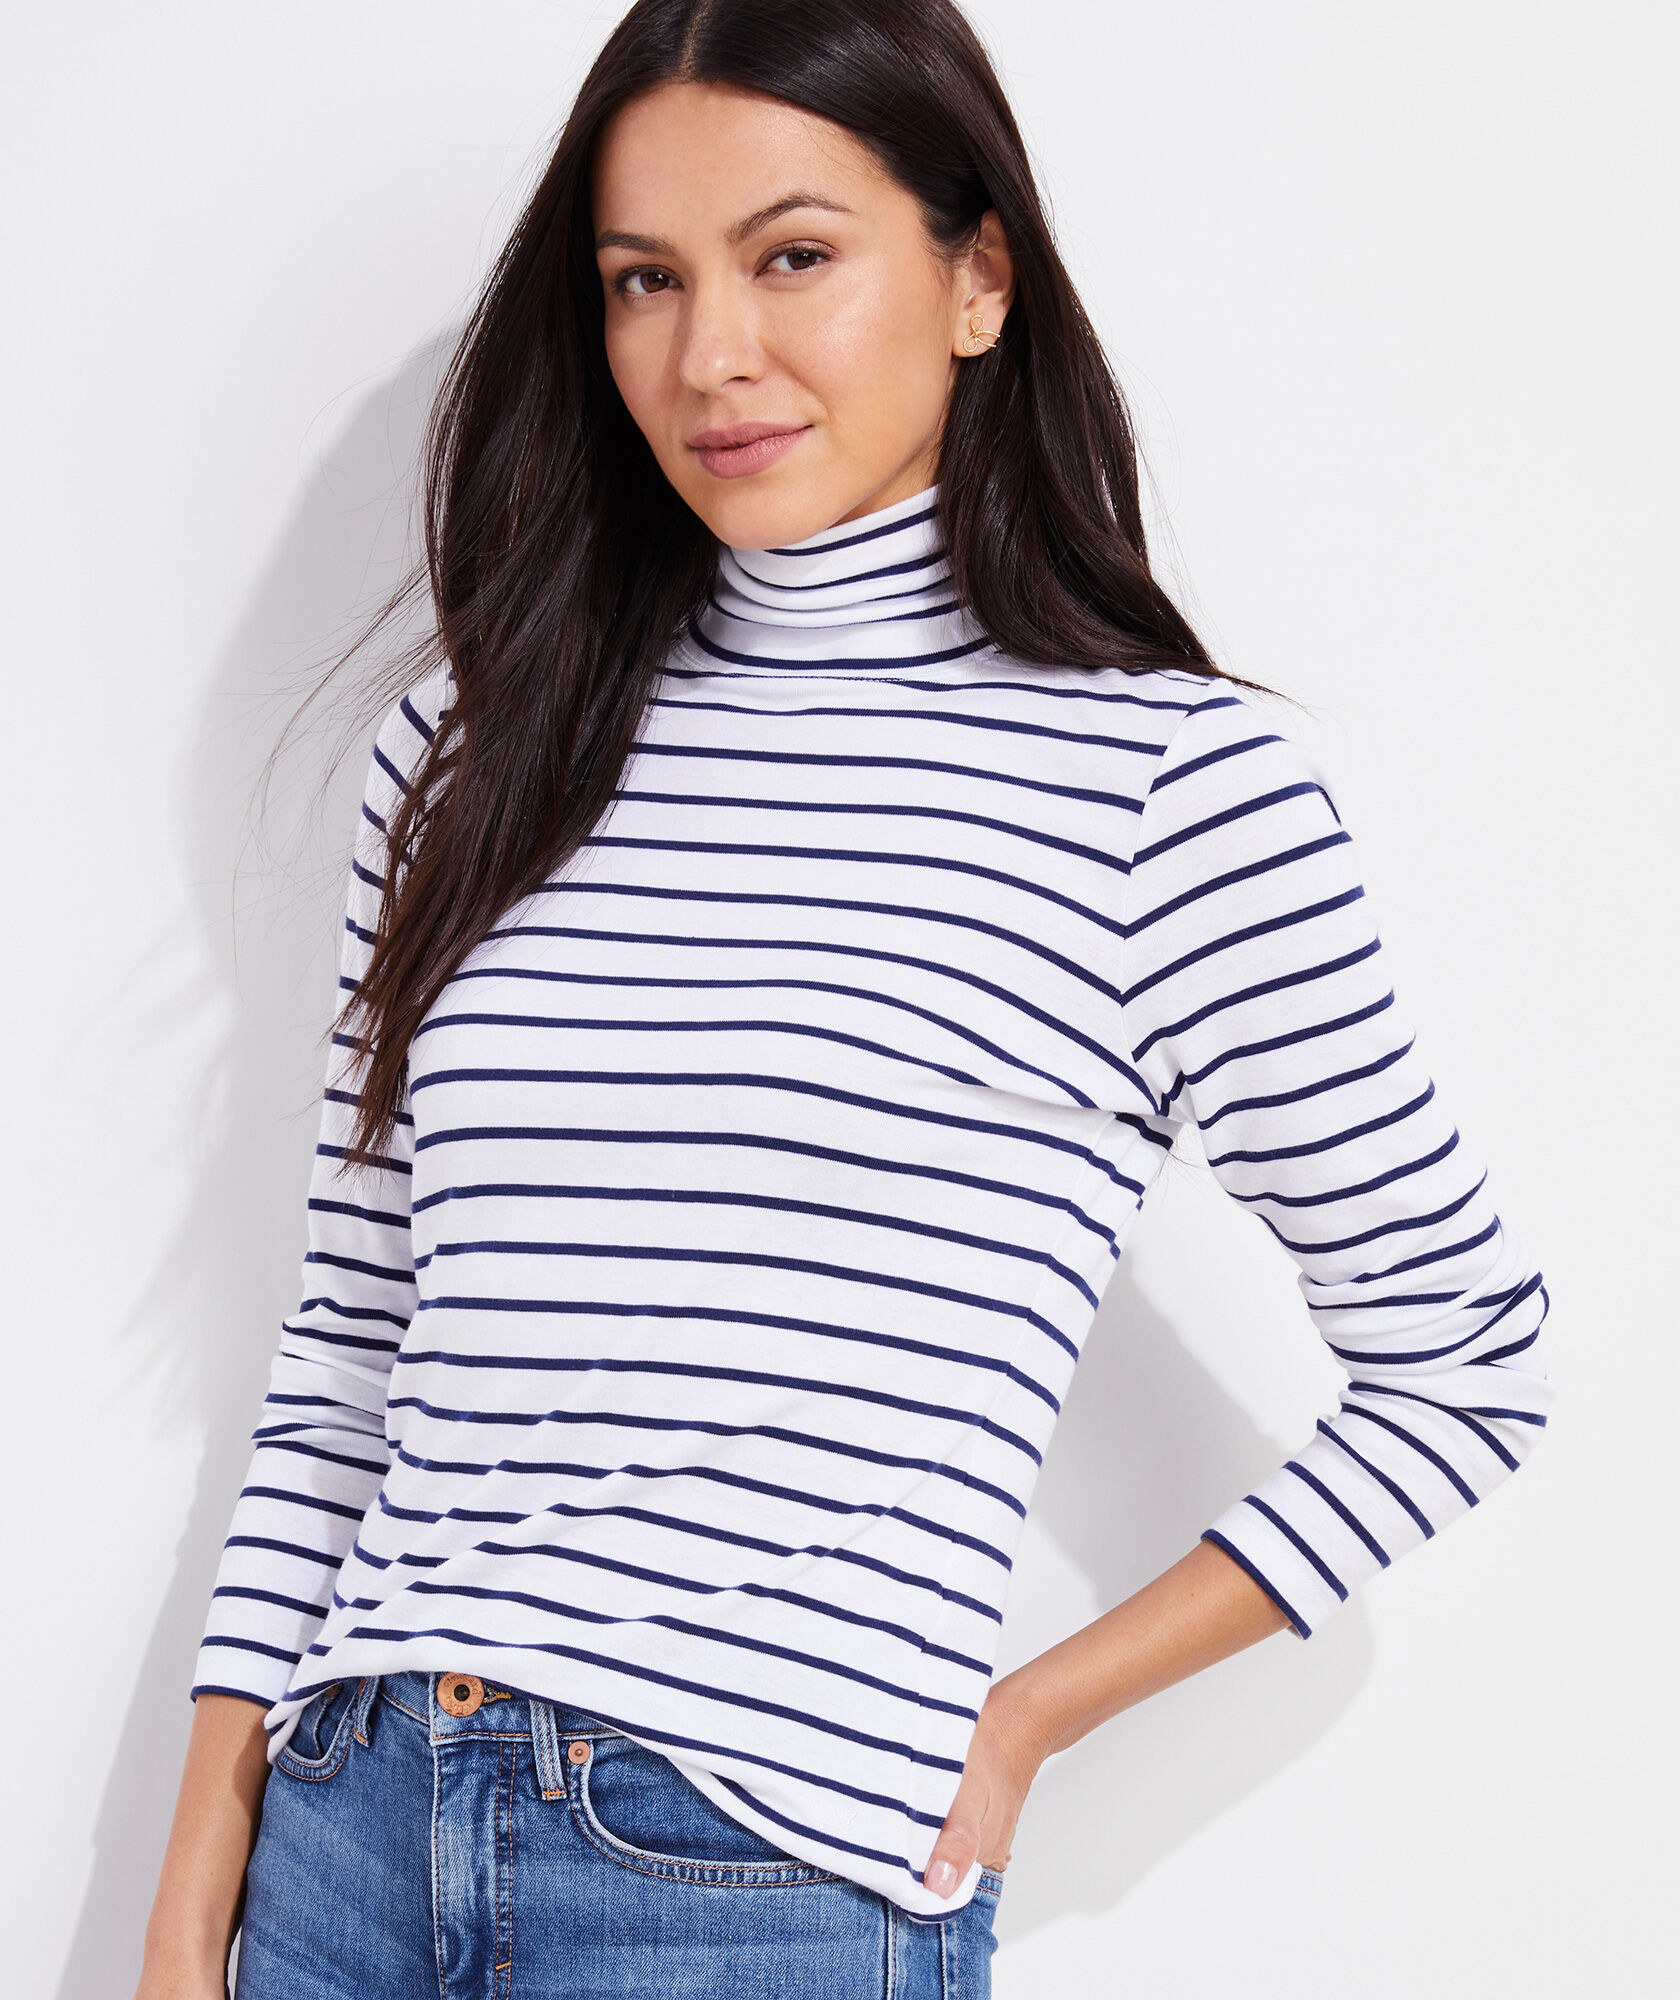 model in a turtleneck shirt with horizontal stripes on it